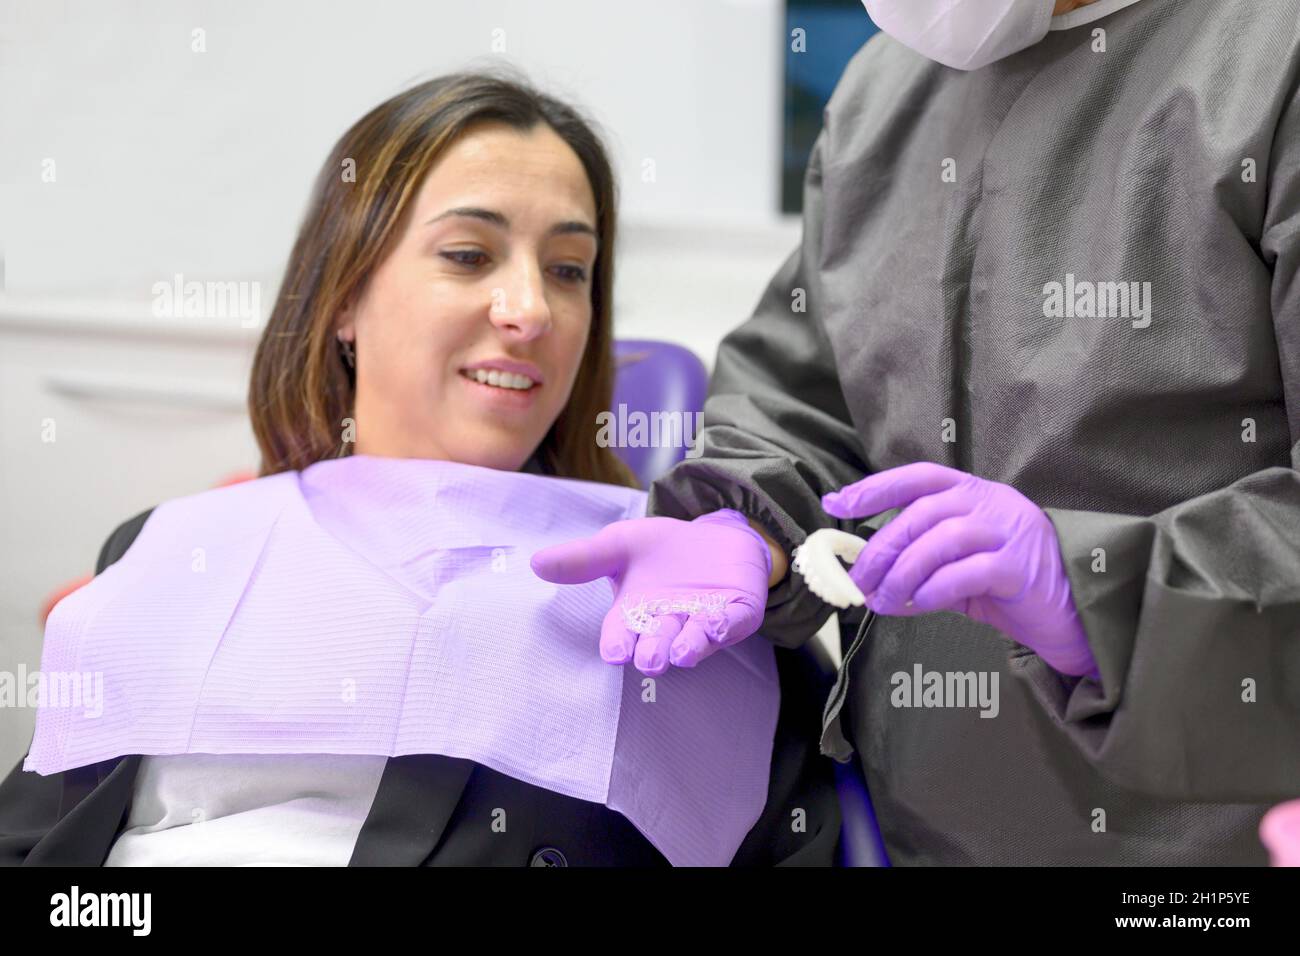 Dentist showing to woman patient an orthodontic silicone trainer ...